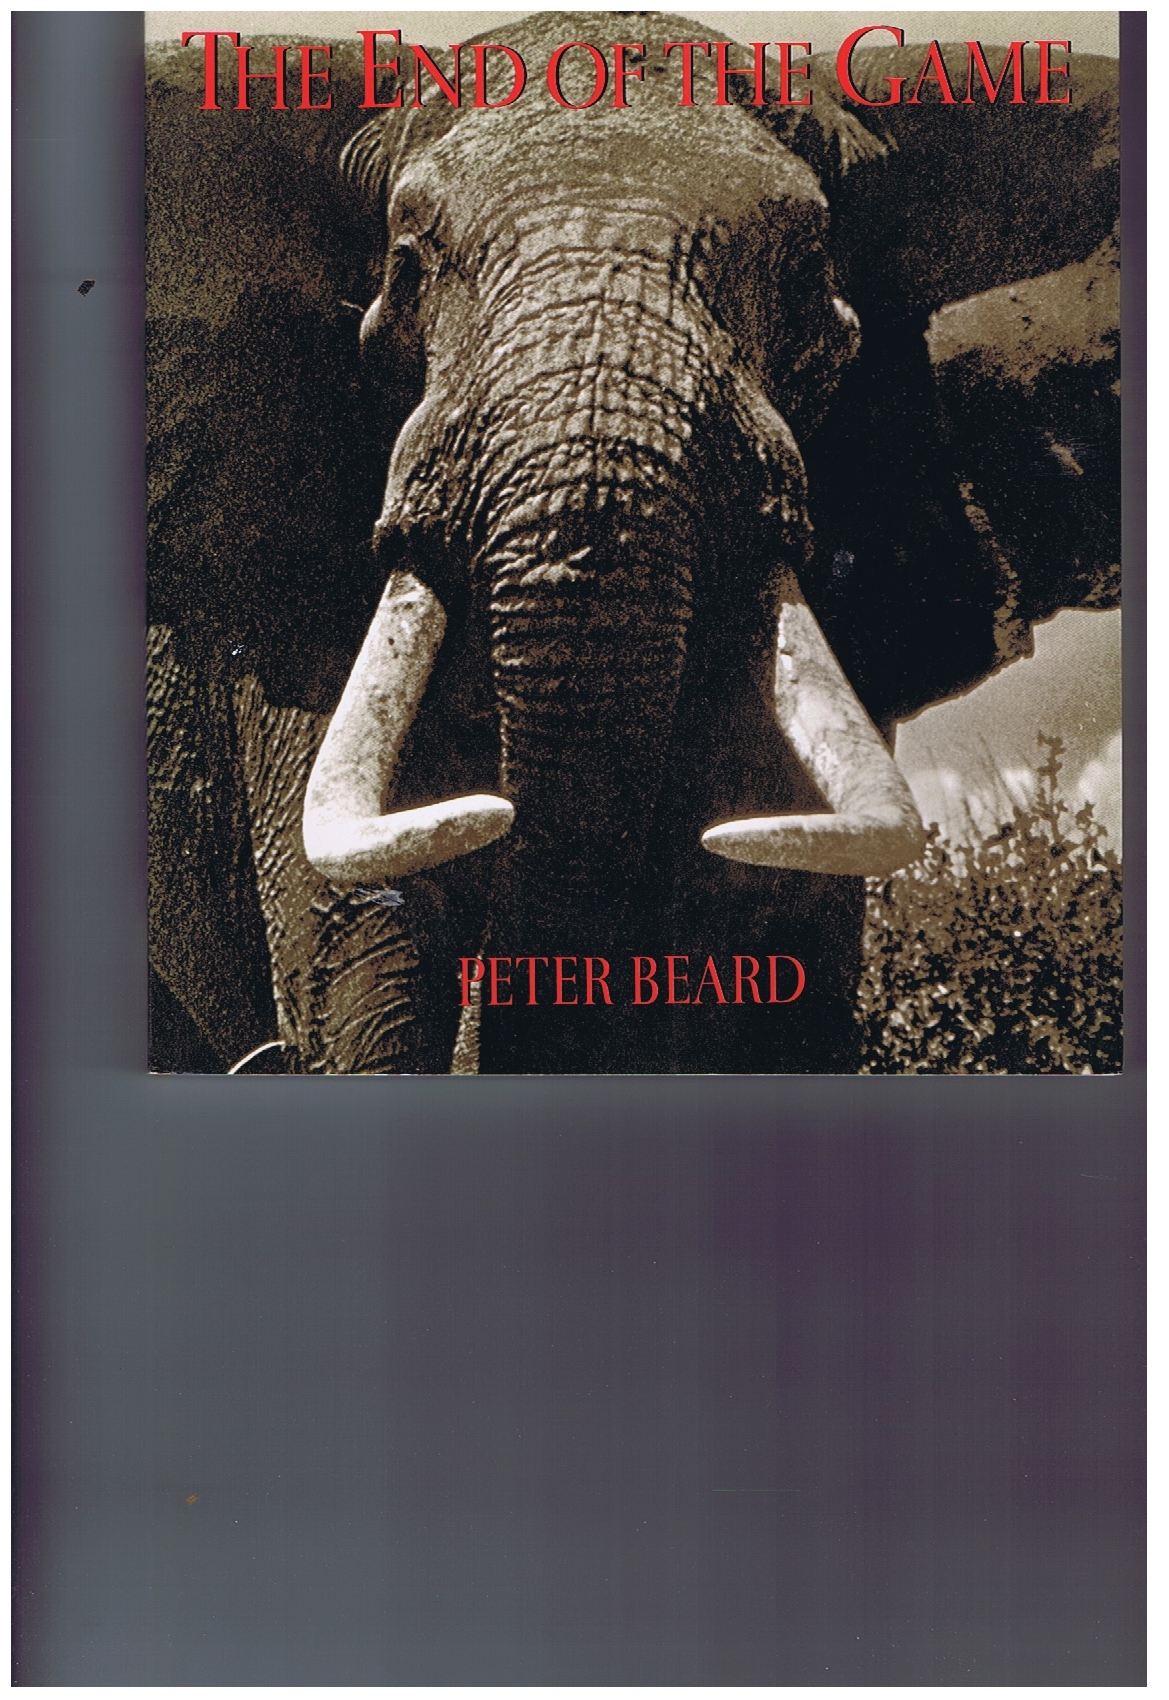 BEARD, PETER H. - The End of the Game: The Last Word from Paradise